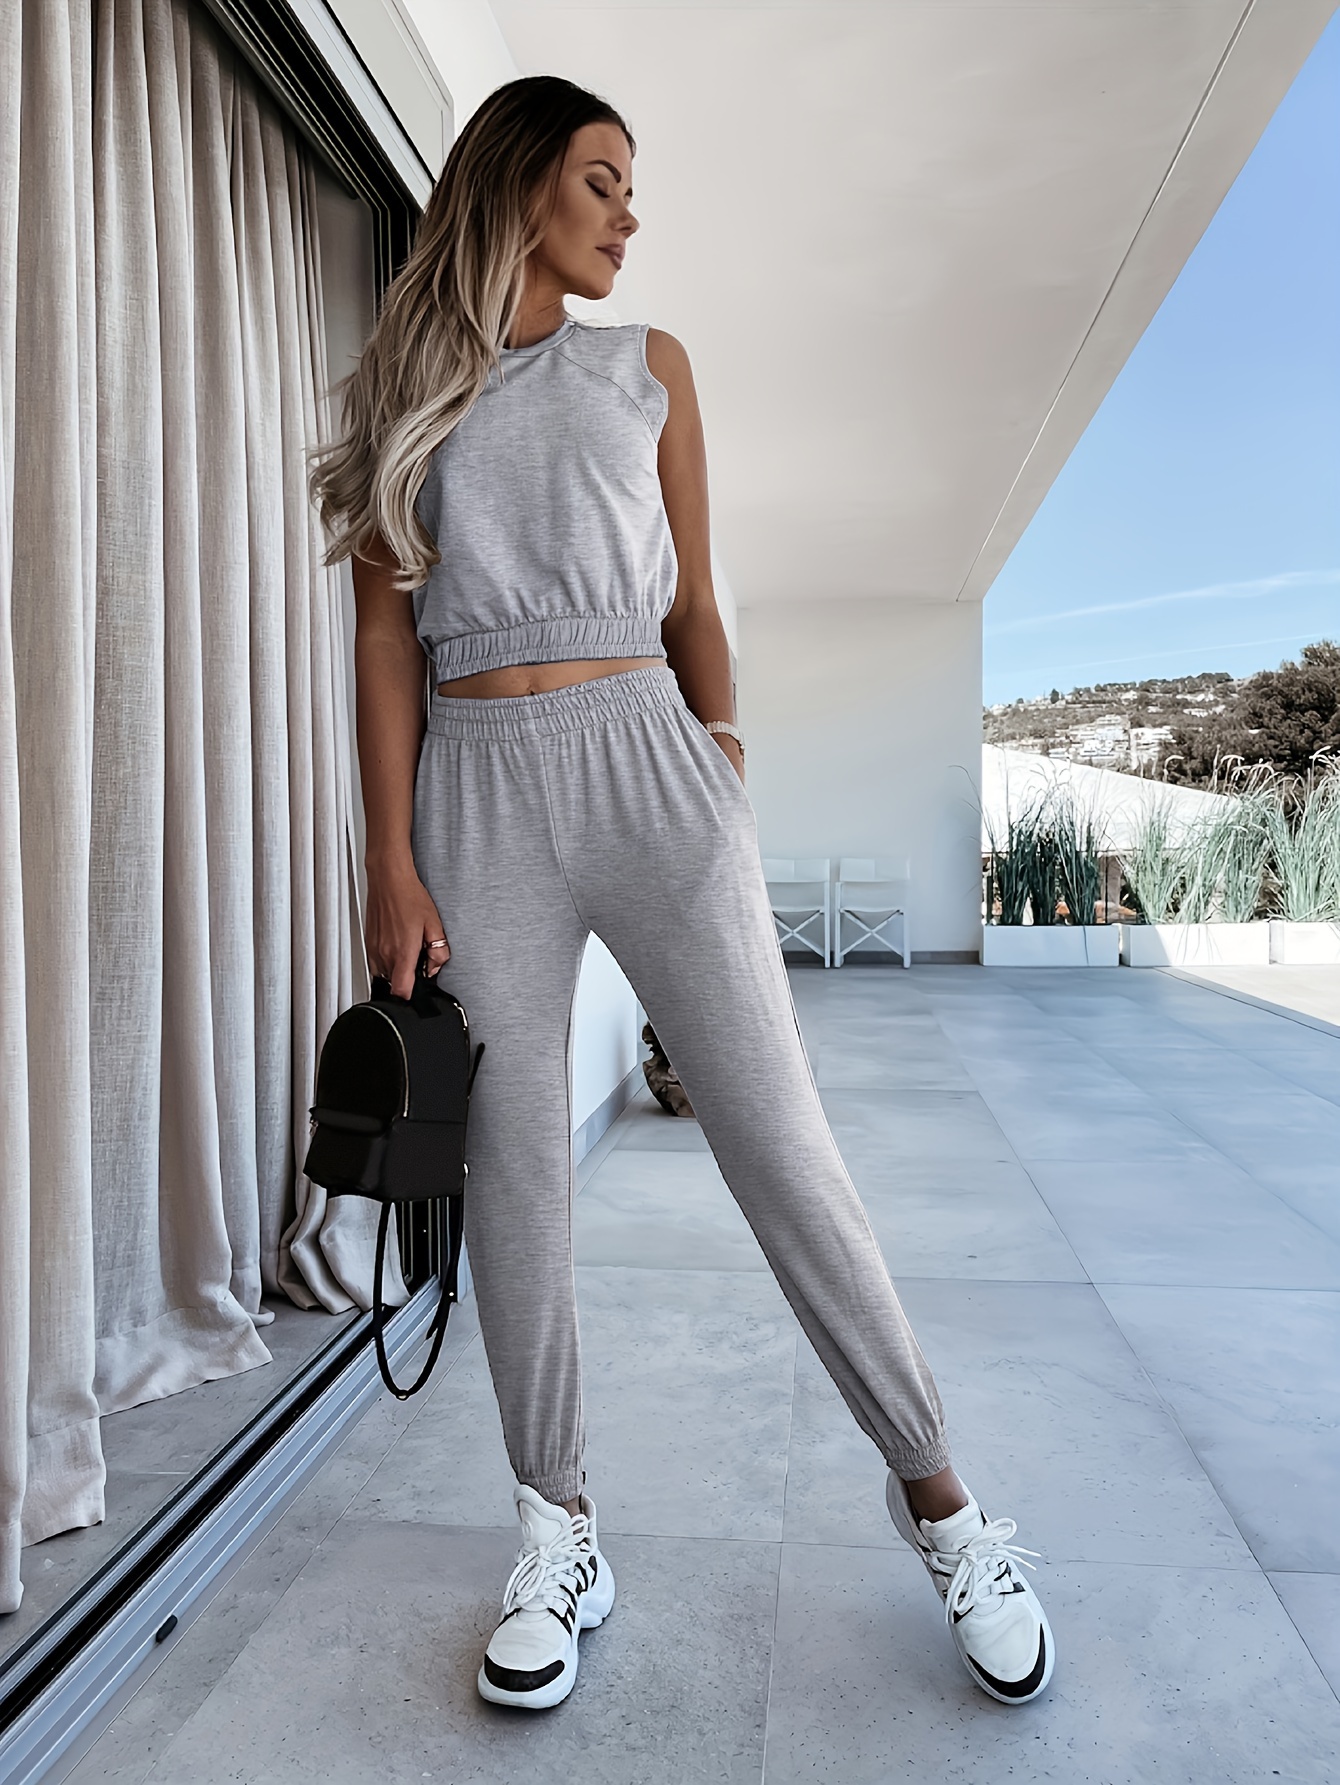 Favorite casual jogger outfits from